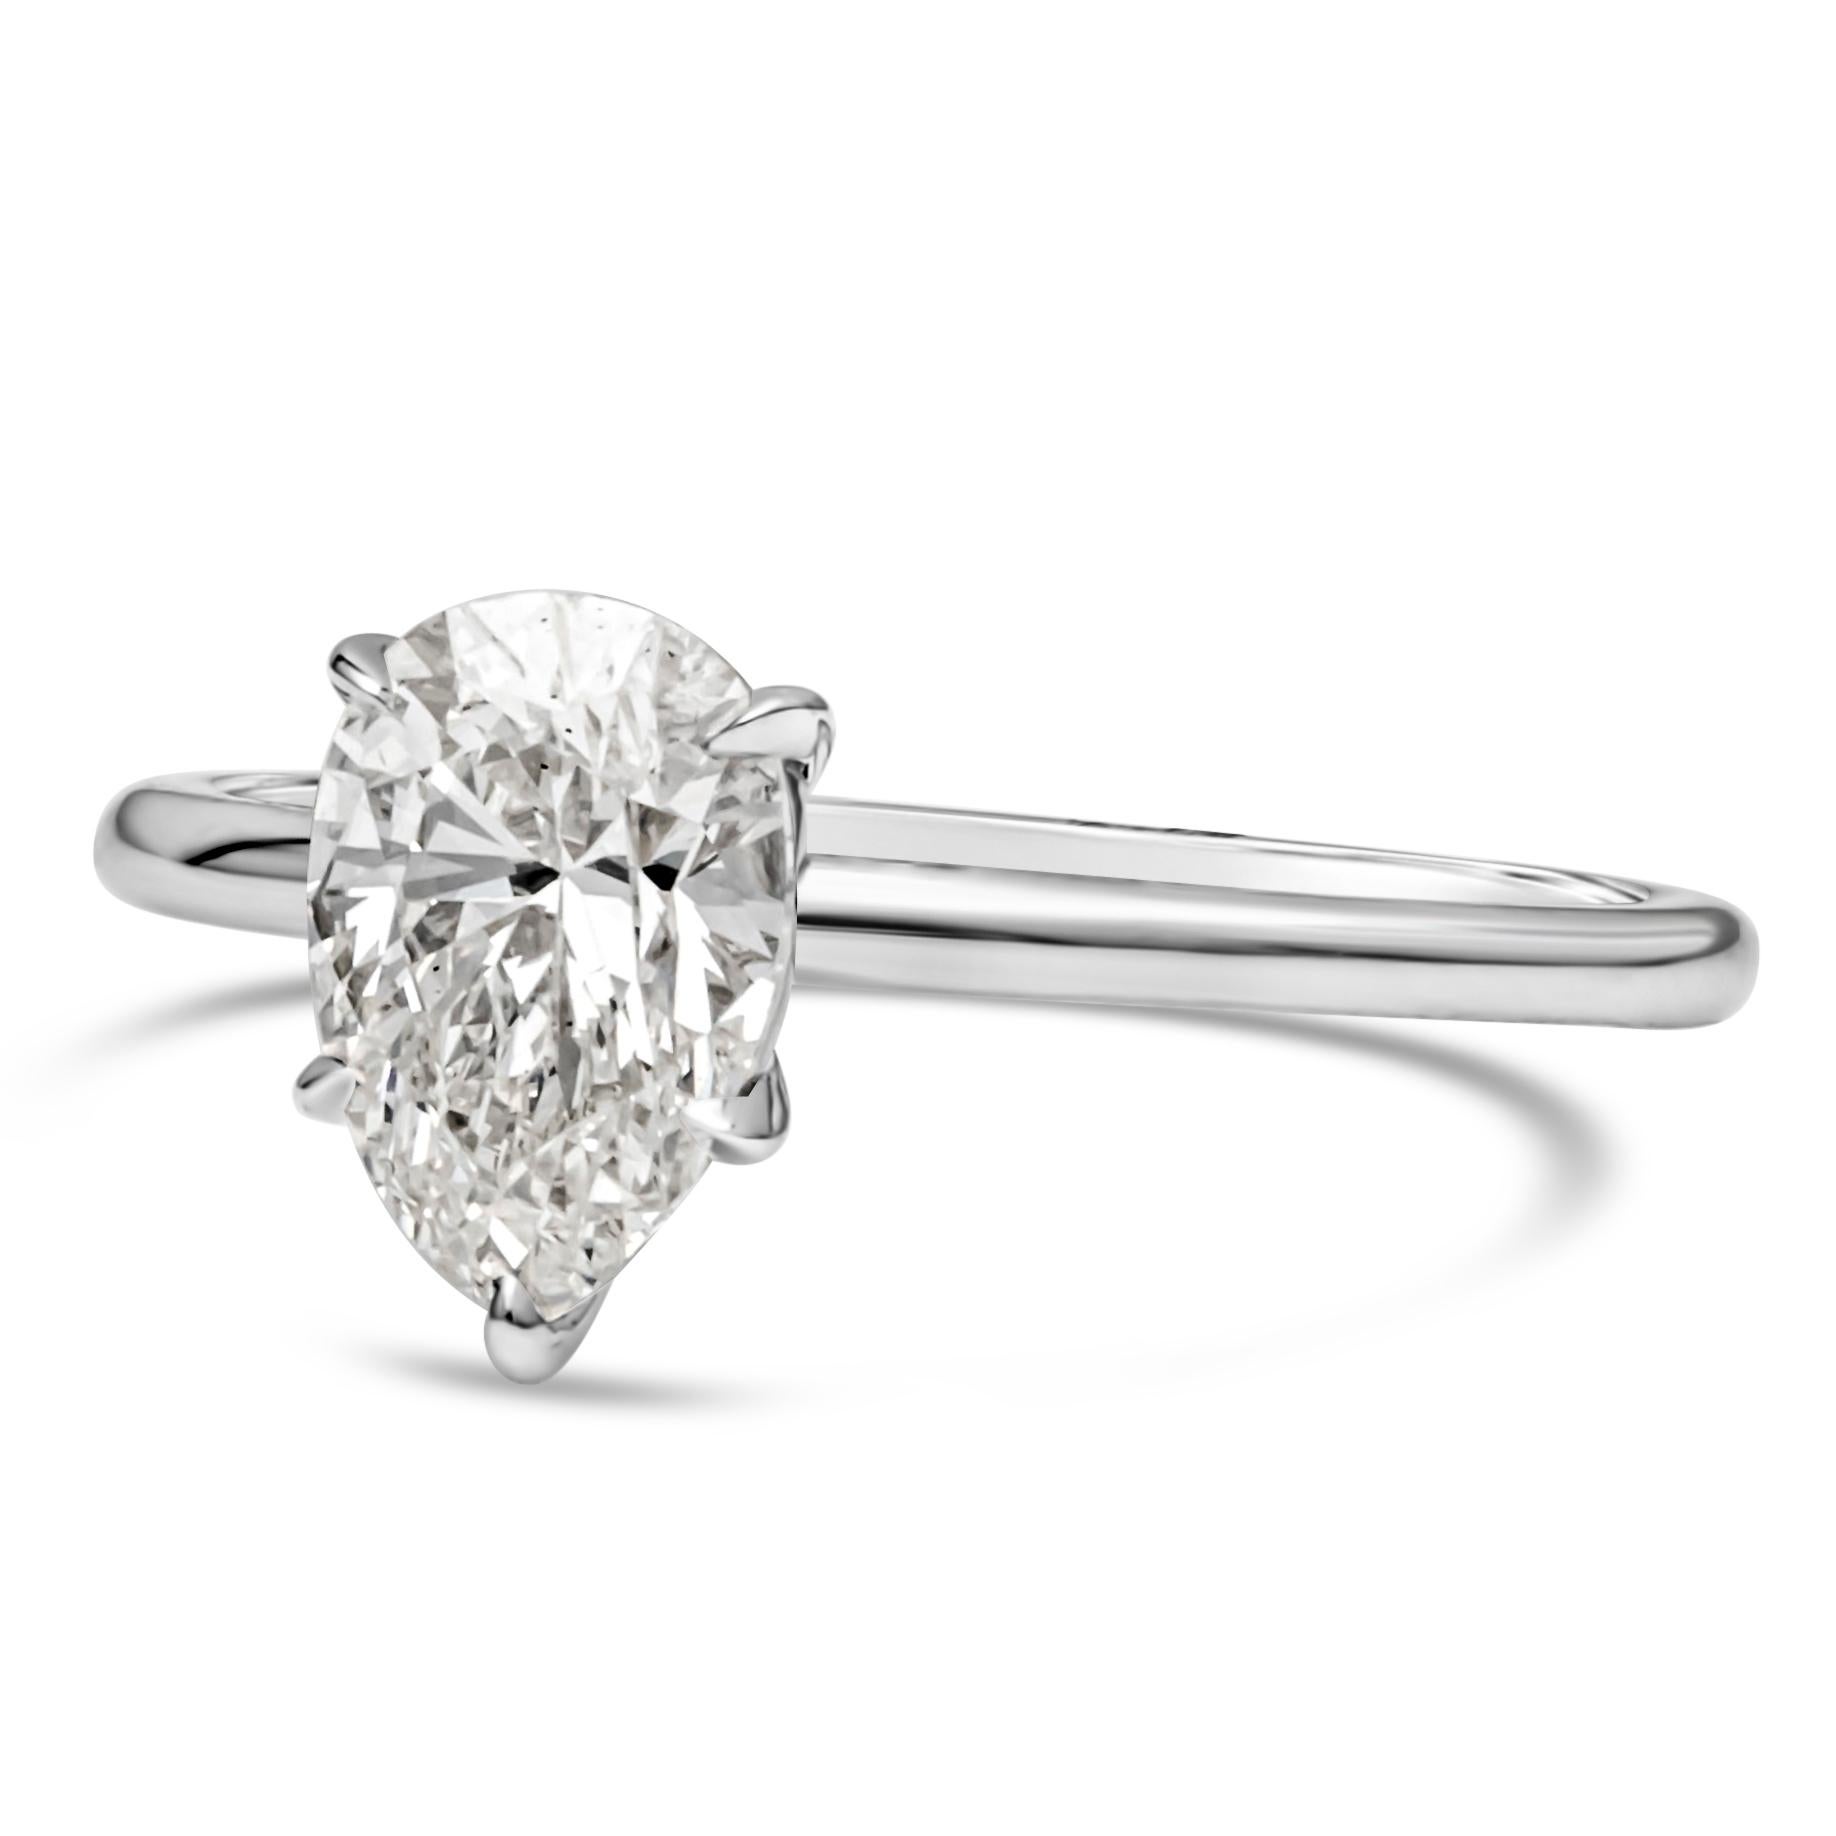 A classic and timeless engagement ring style showcasing a 1.26 carats pear shape diamond certified by GIA as I color and SI1 in clarity, set in a five prong basket setting and thin 14k white gold band. Size 6 US resizable upon request.

Style